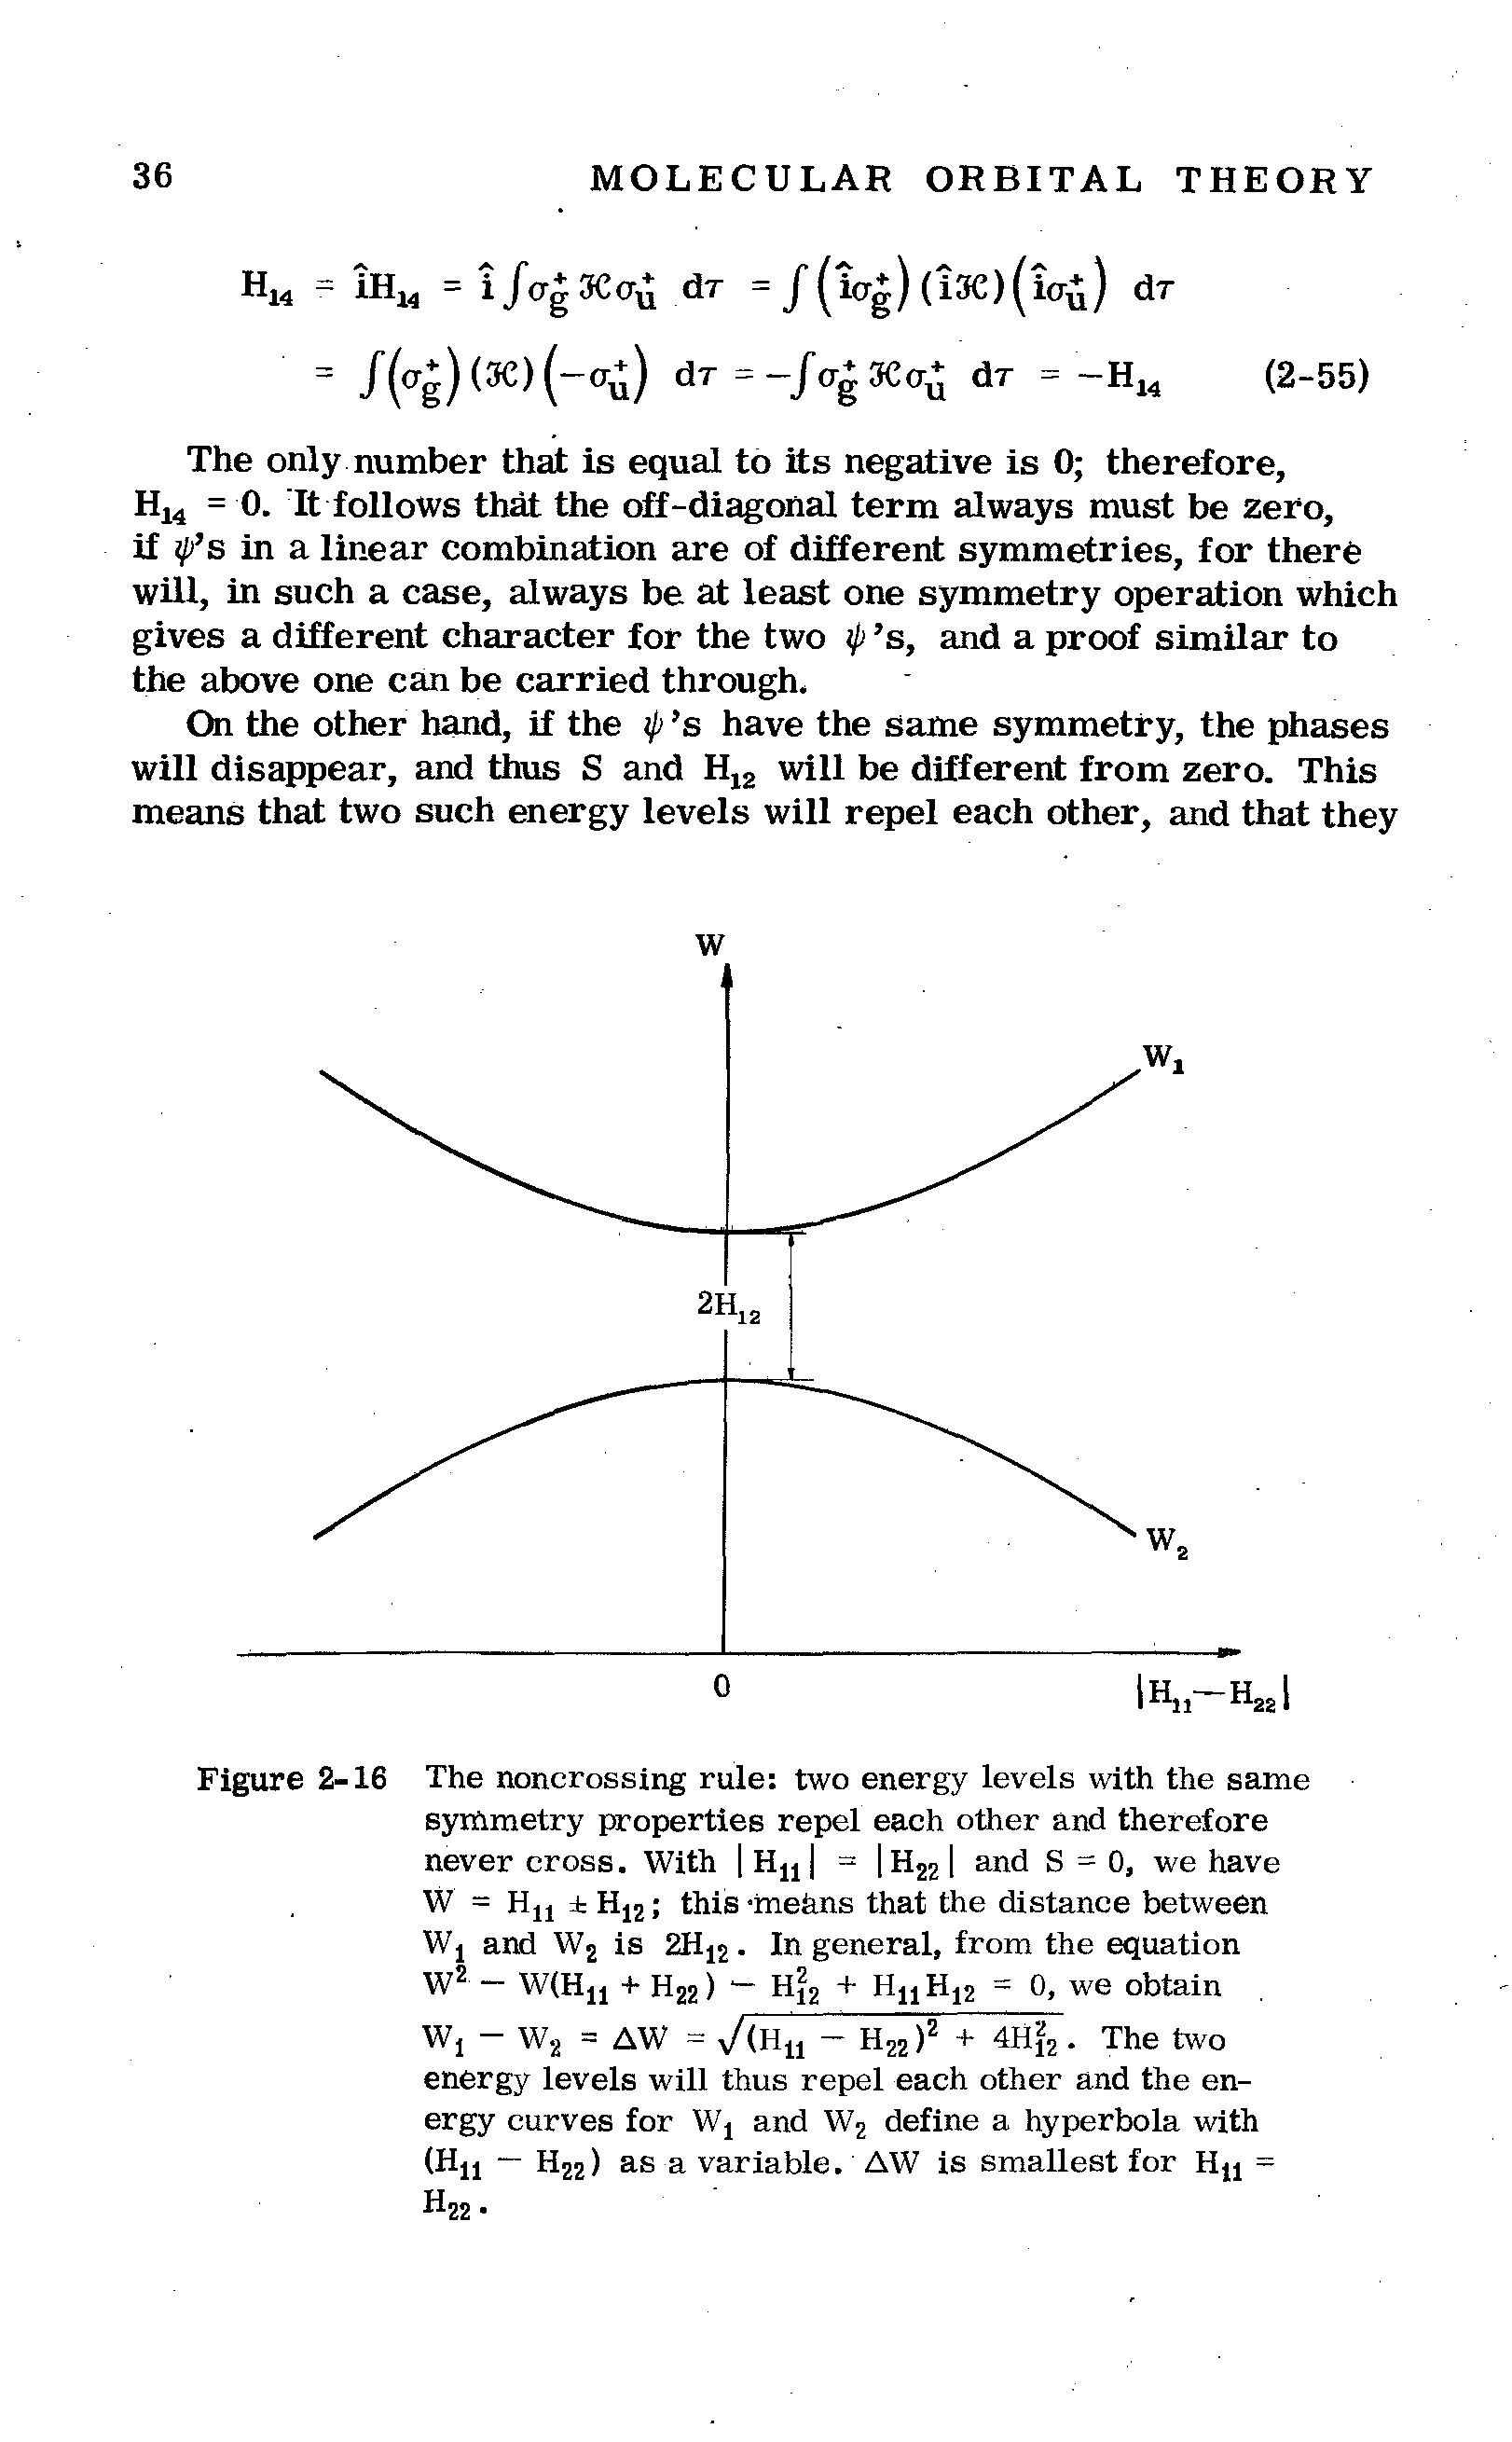 Figure 2-16 The noncrossing rule two energy levels with the same symmetry properties repel each other and therefore never cross. With = H22 and S = 0, we have...